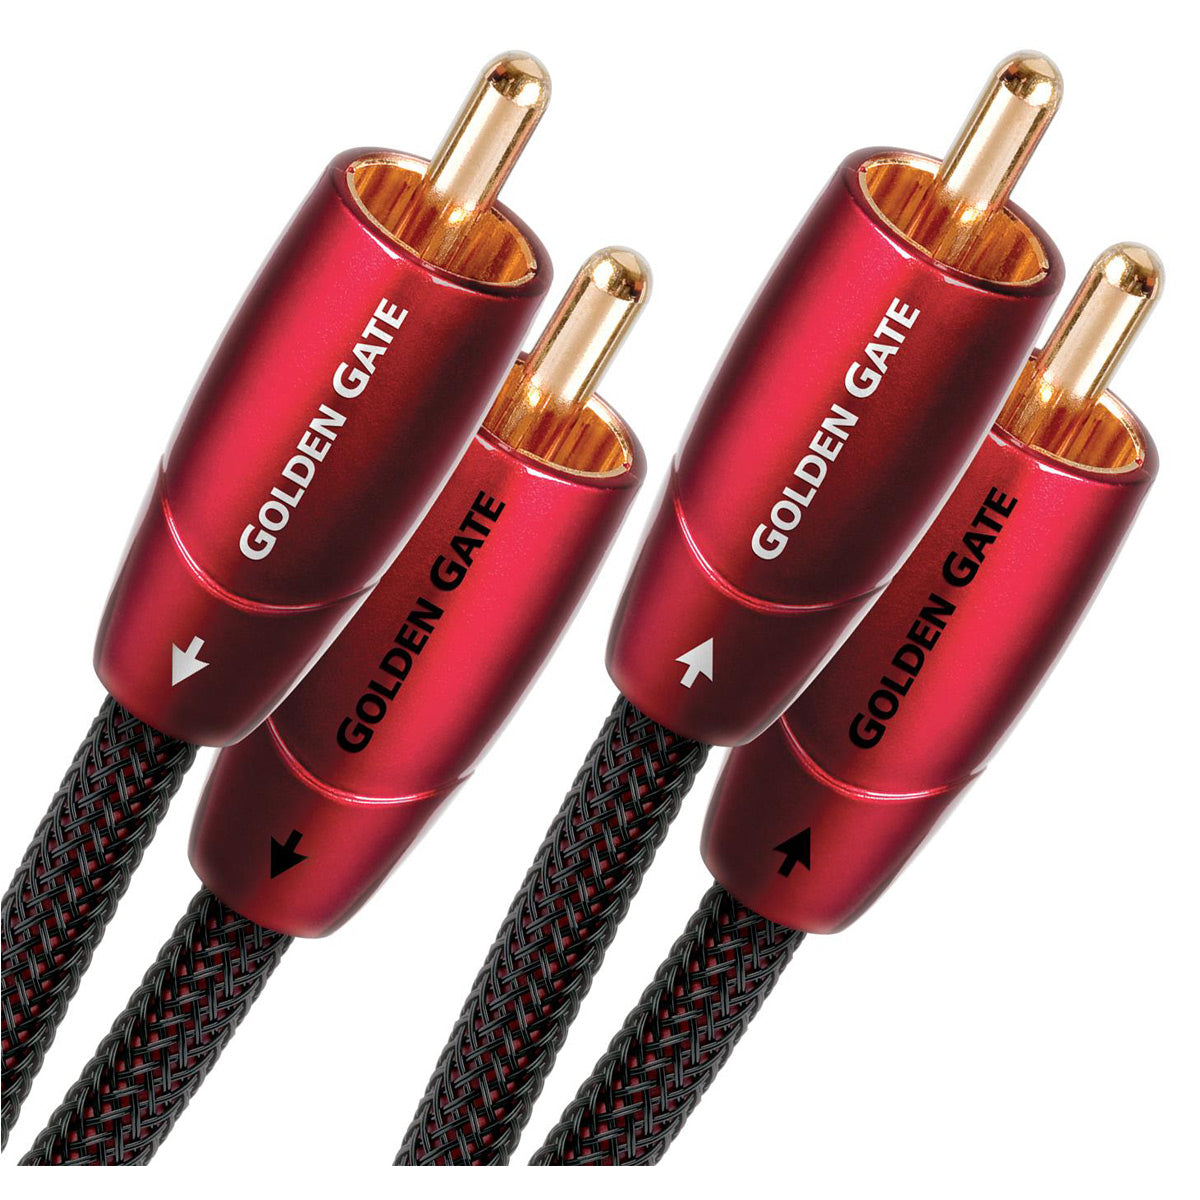 AudioQuest Golden Gate 1m (3.28 ft) RCA Male to RCA Male Cable - Pair